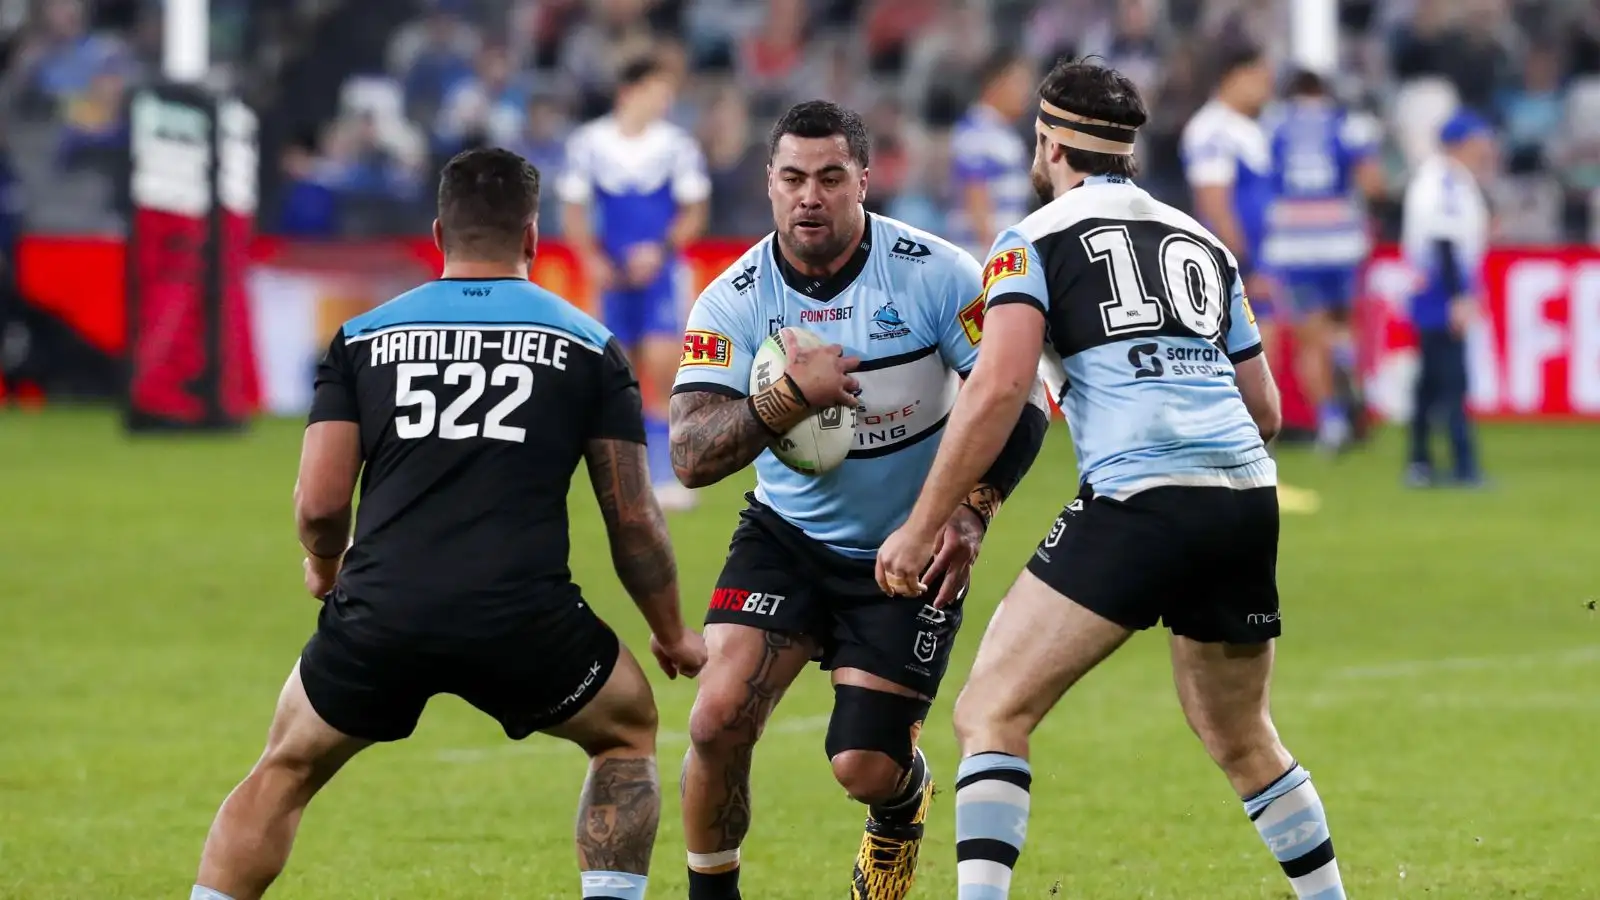 Former NRL star Andrew Fifita reveals how close he came to Super League switch